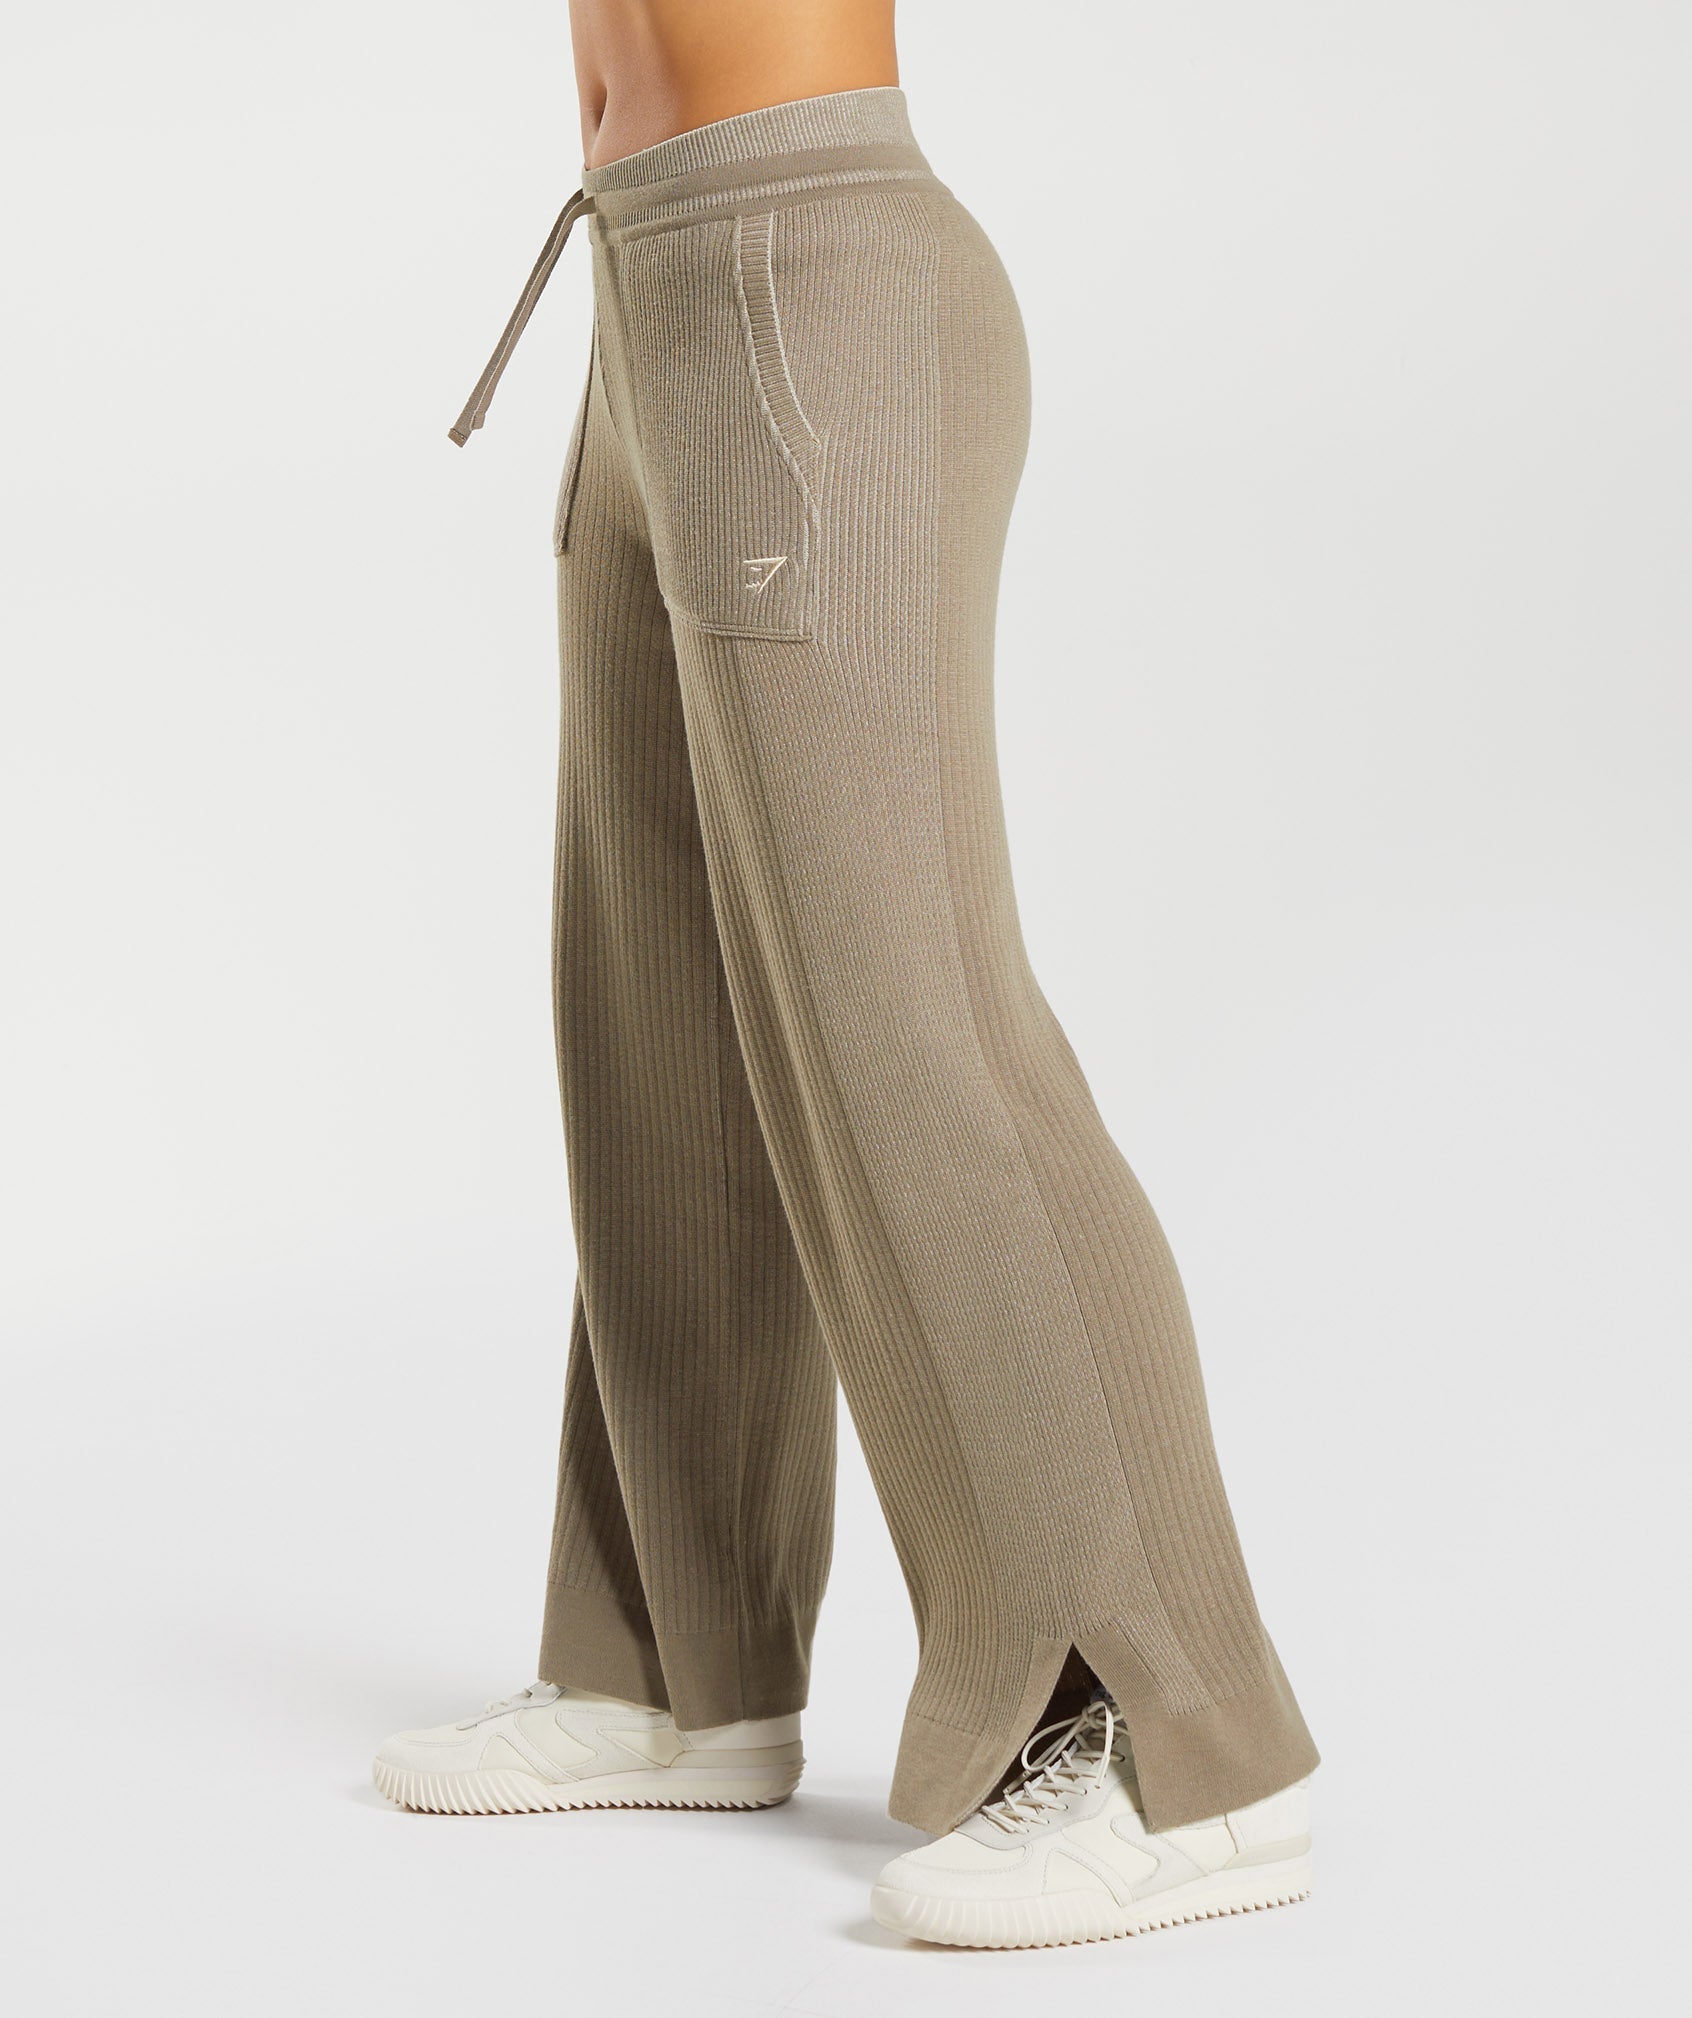 Pause Knitwear Joggers in Cement Brown/Pebble Grey - view 4